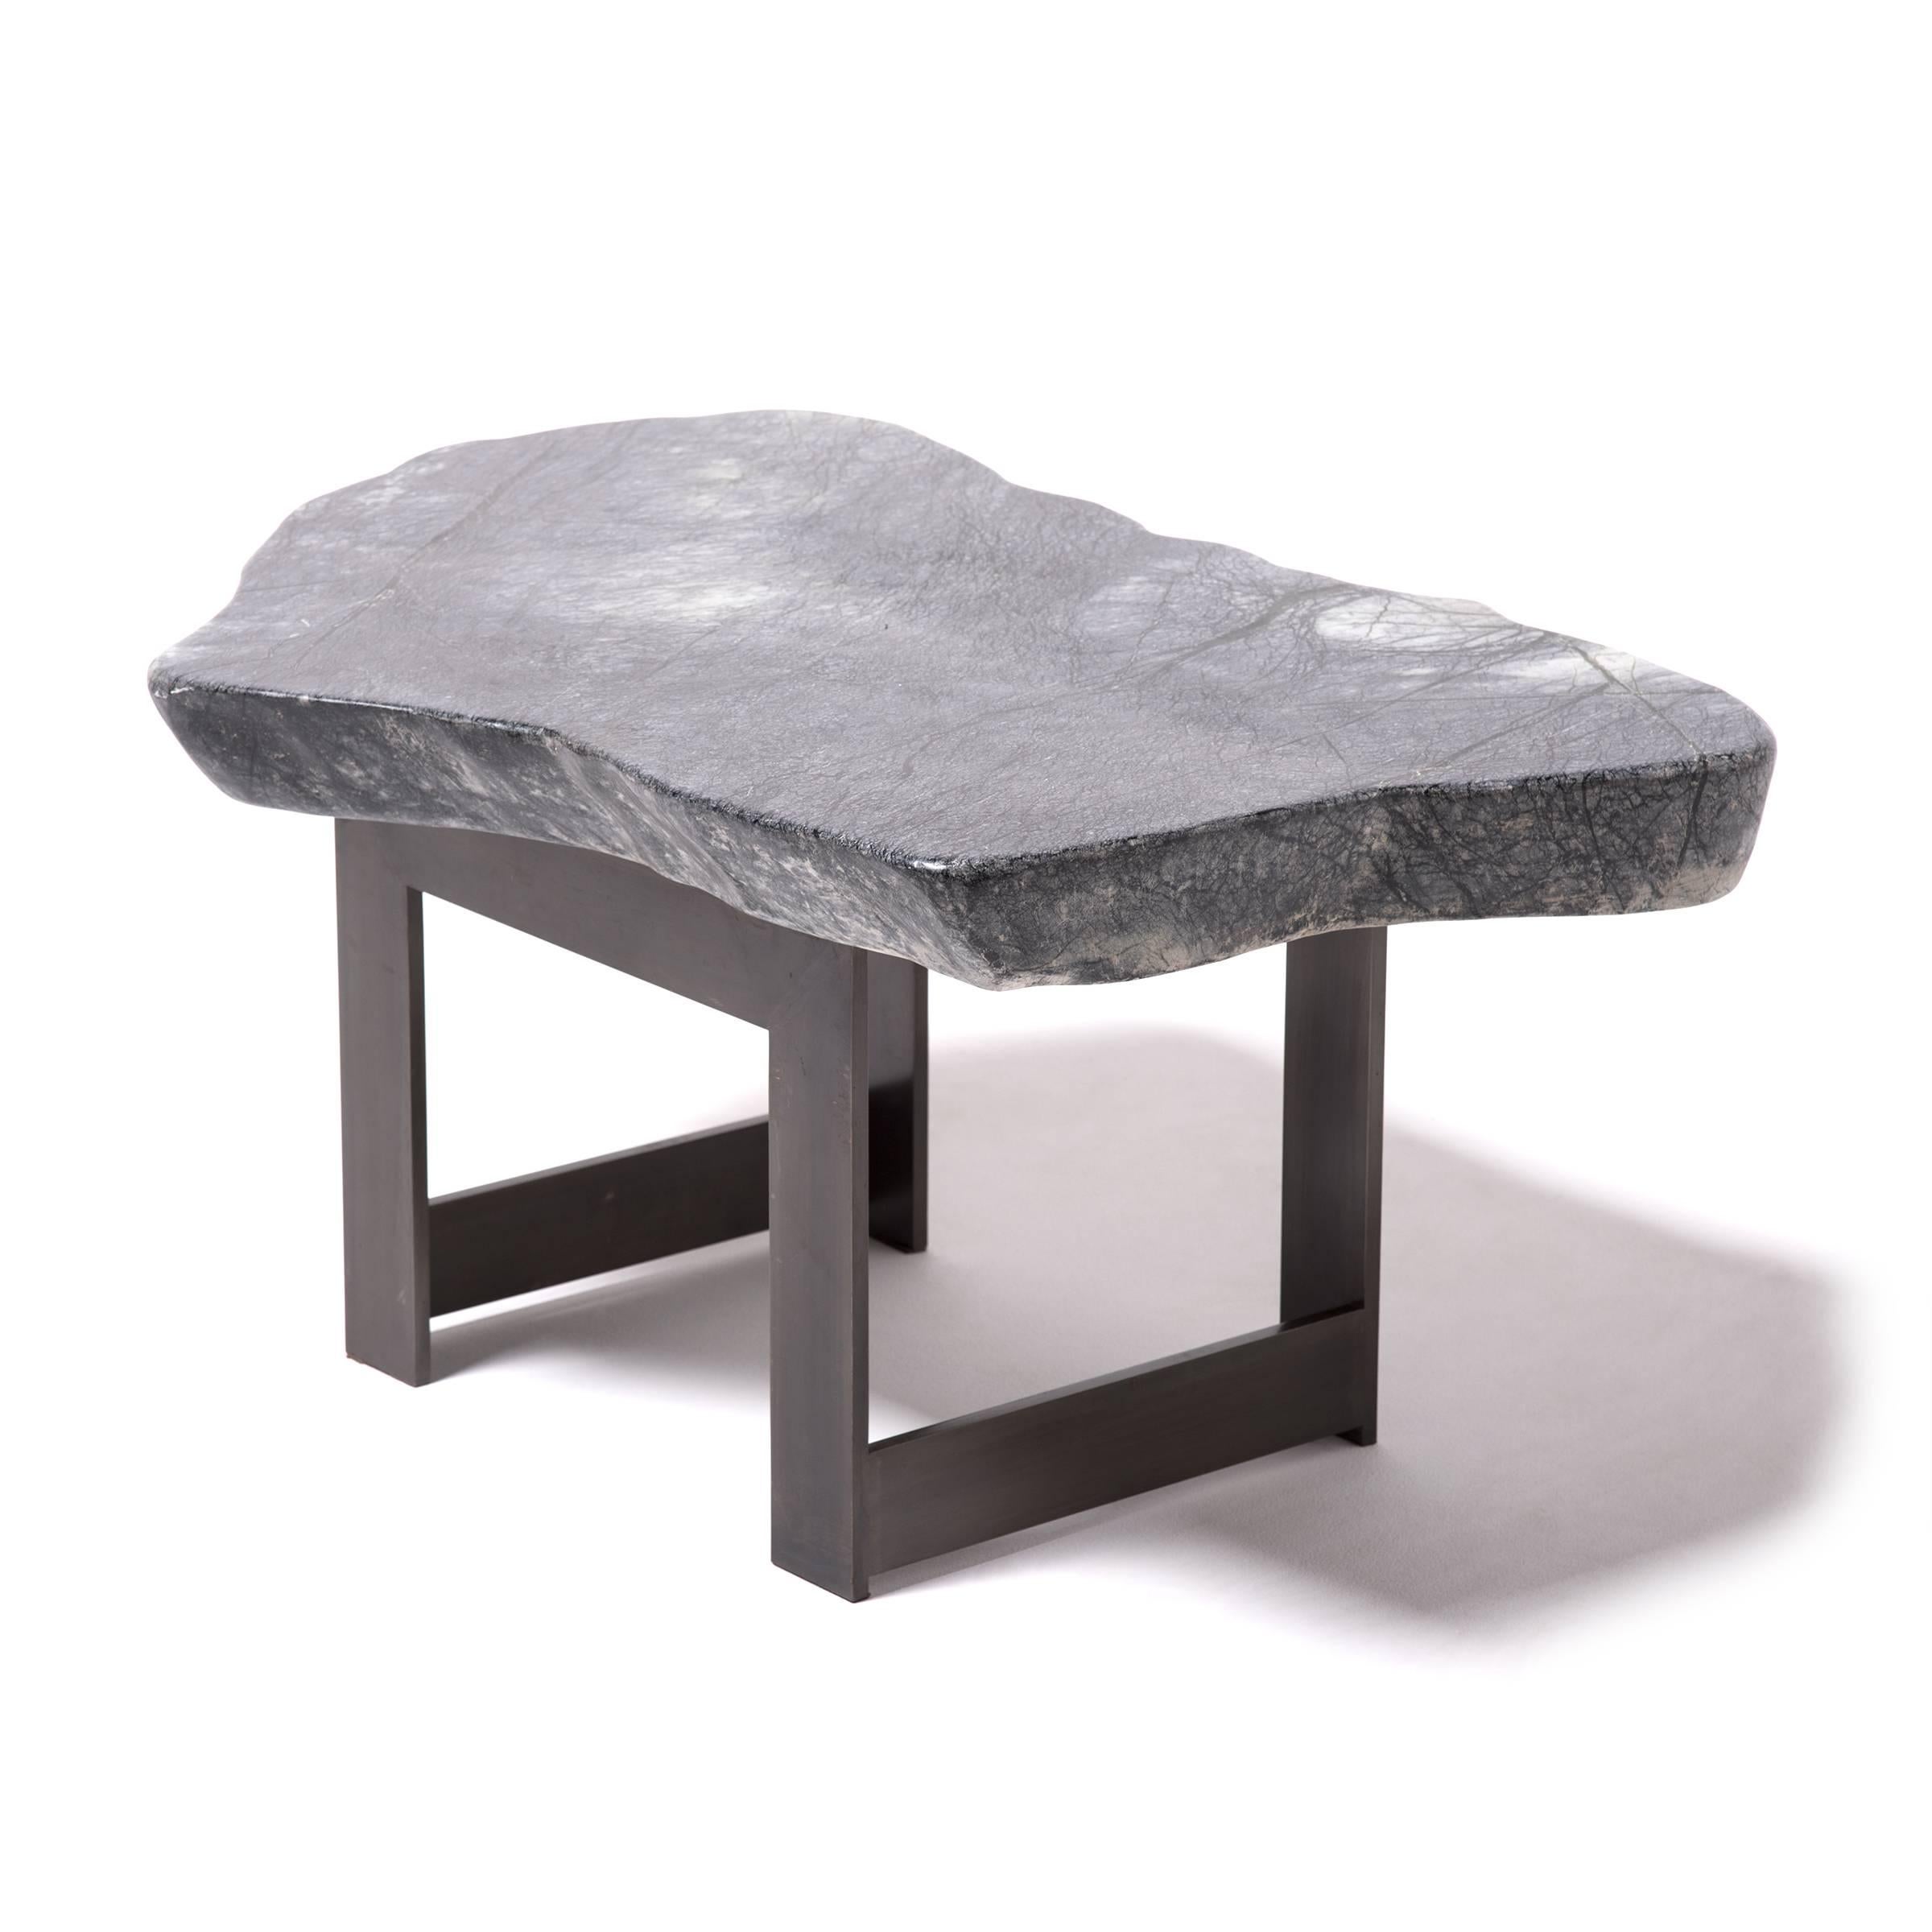 Contemporary Chinese Meditation Stone Top Table